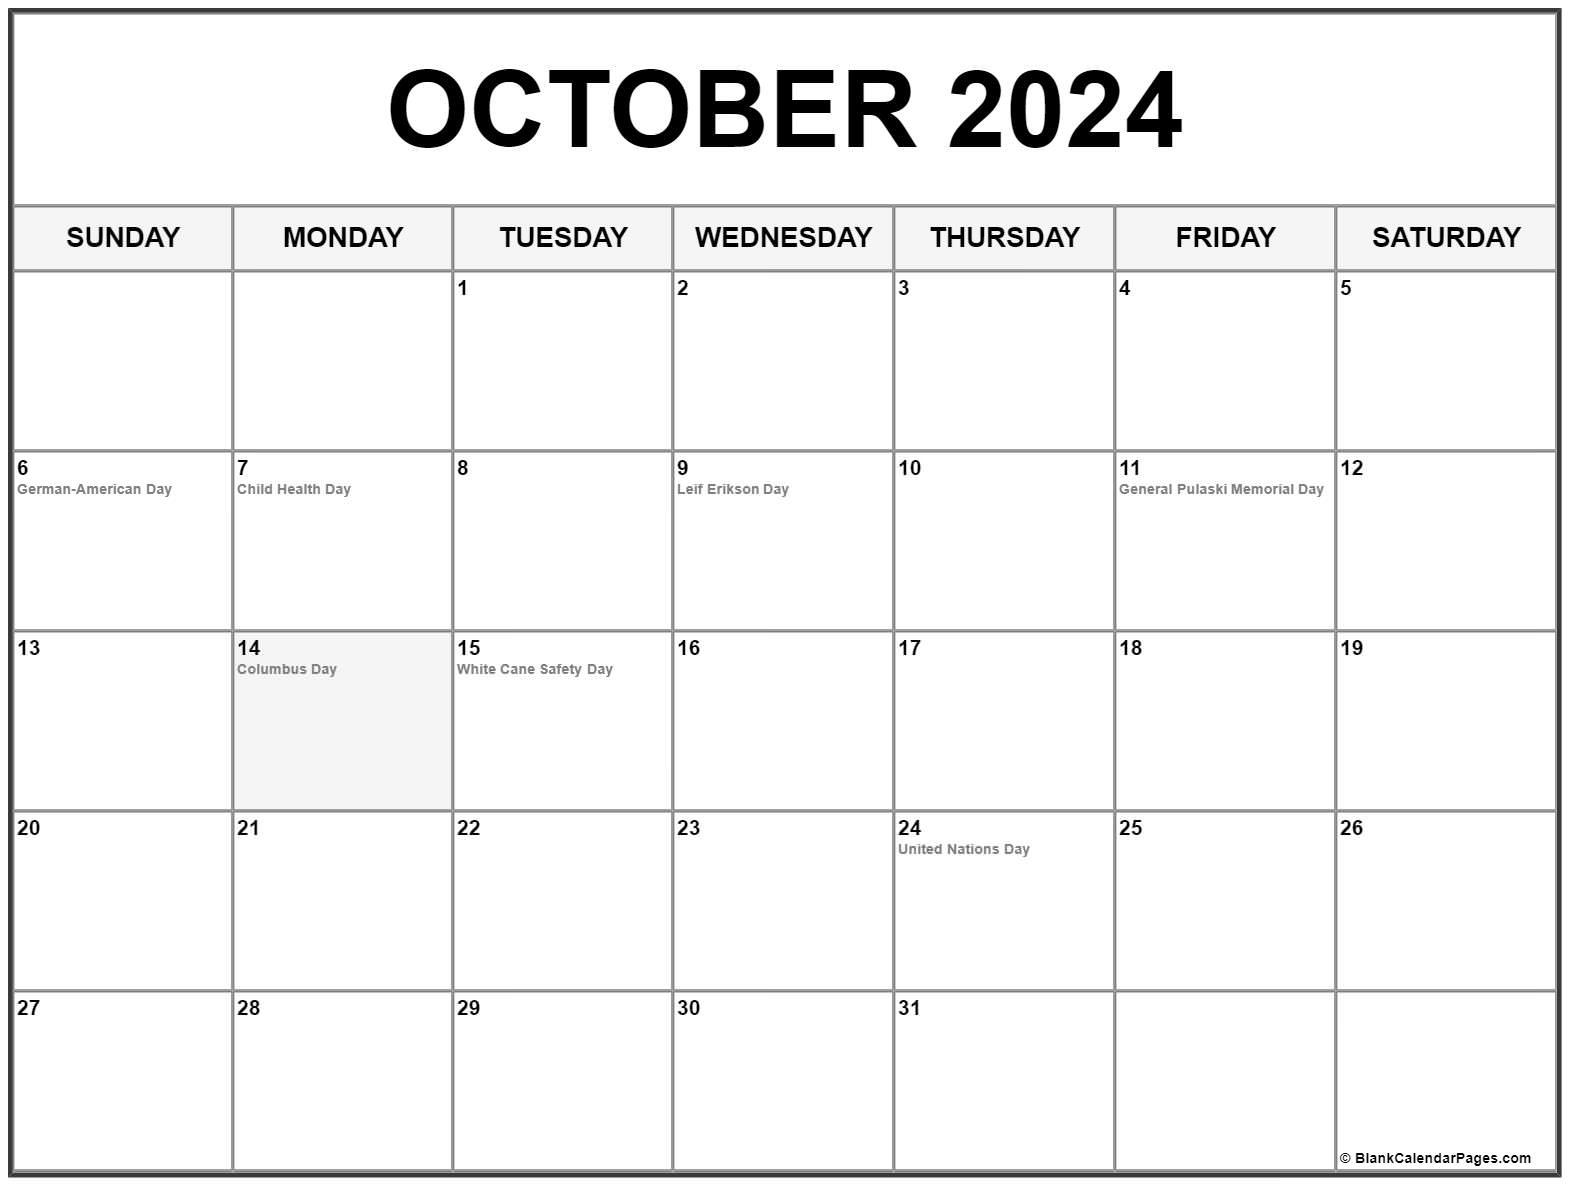 Calendar October 2024 With Holidays Free Printable 2024 Calendar With - Free Printable 2024 Calendar With Holidays Without Downloading